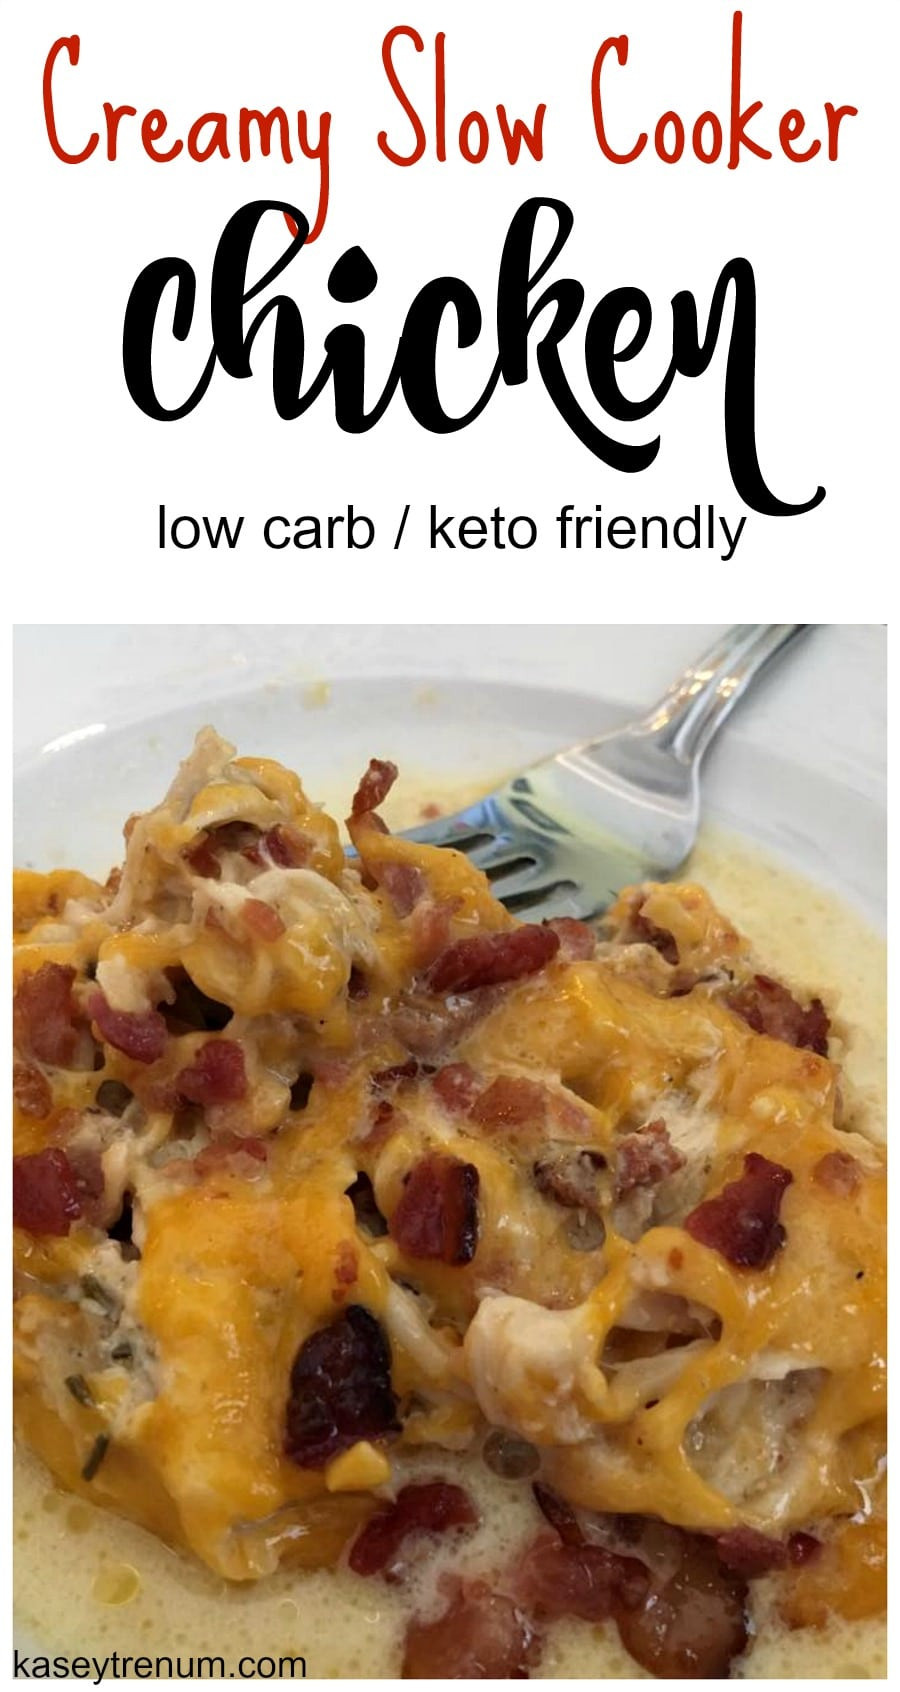 Slow Cooker Keto Recipes Dinners
 Creamy Slow Cooker Chicken with Bacon & Cheese low carb